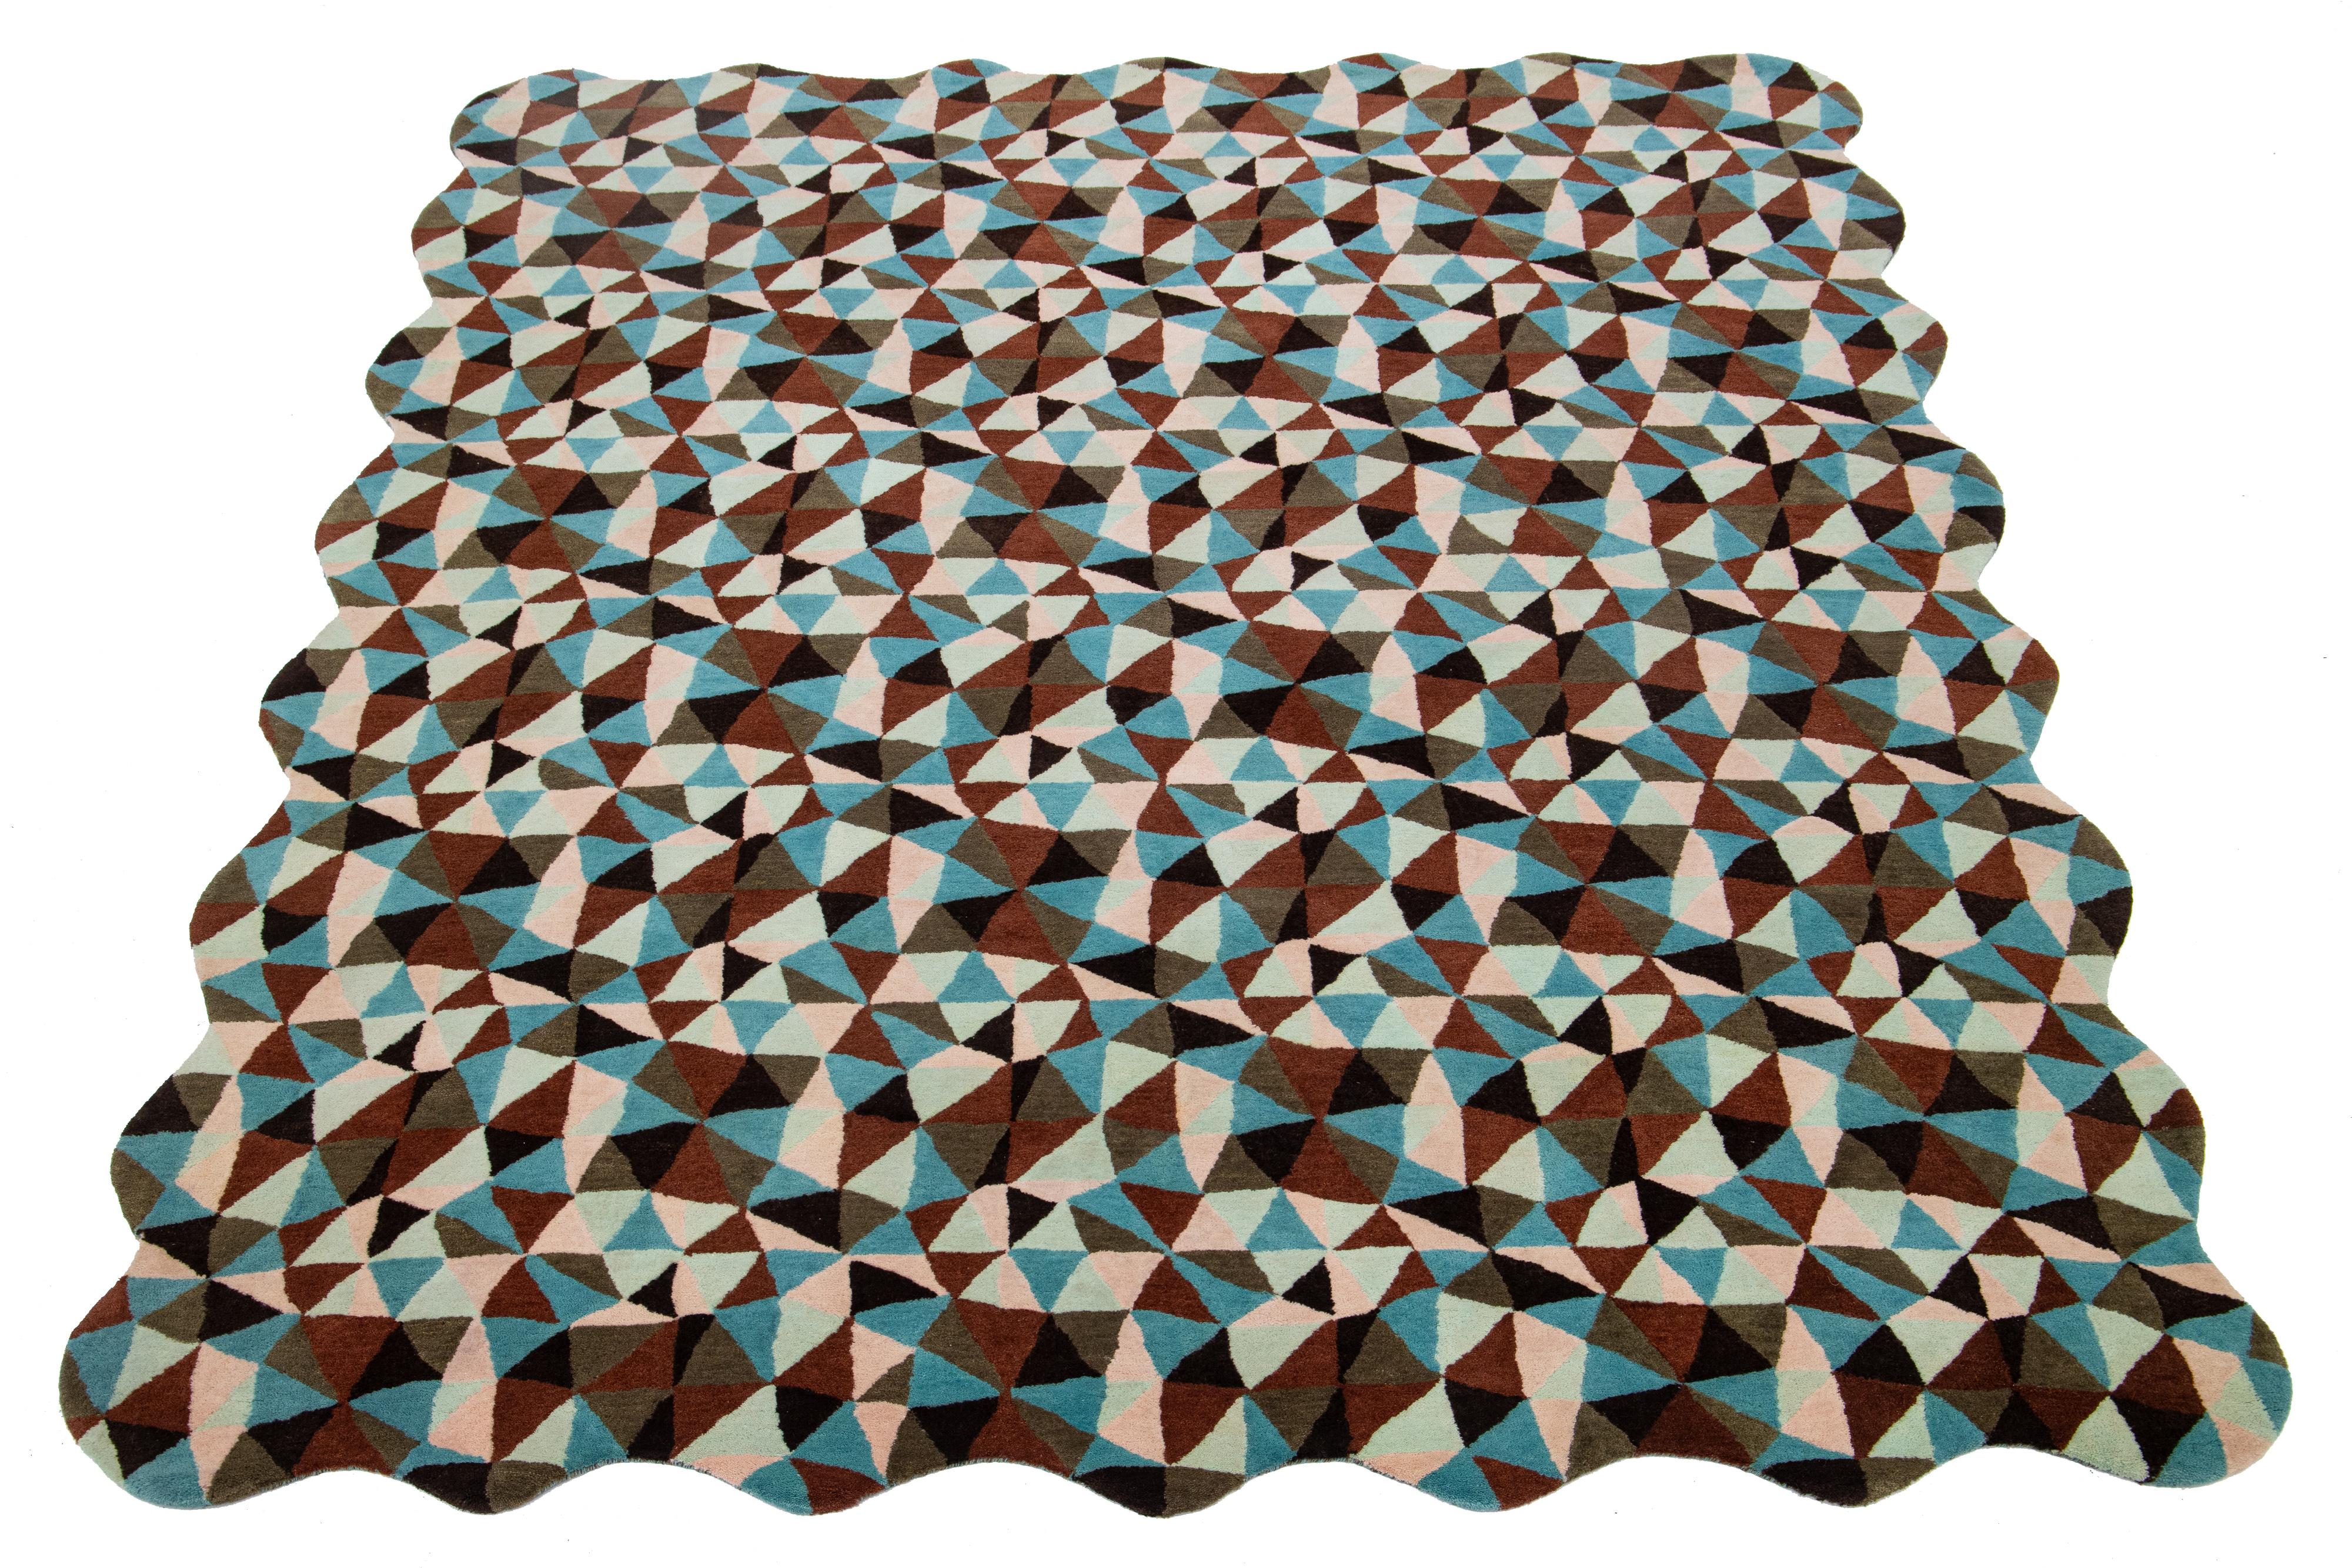 This beautiful, modern hand-tufted wool rug is part of our Laura Gottwald for Apadana Collection and features brown, blue, pink, and green fields. This Mosaico design: A kaleidoscopic repeat pattern of free-hand triangles, Mosaico is reminiscent of